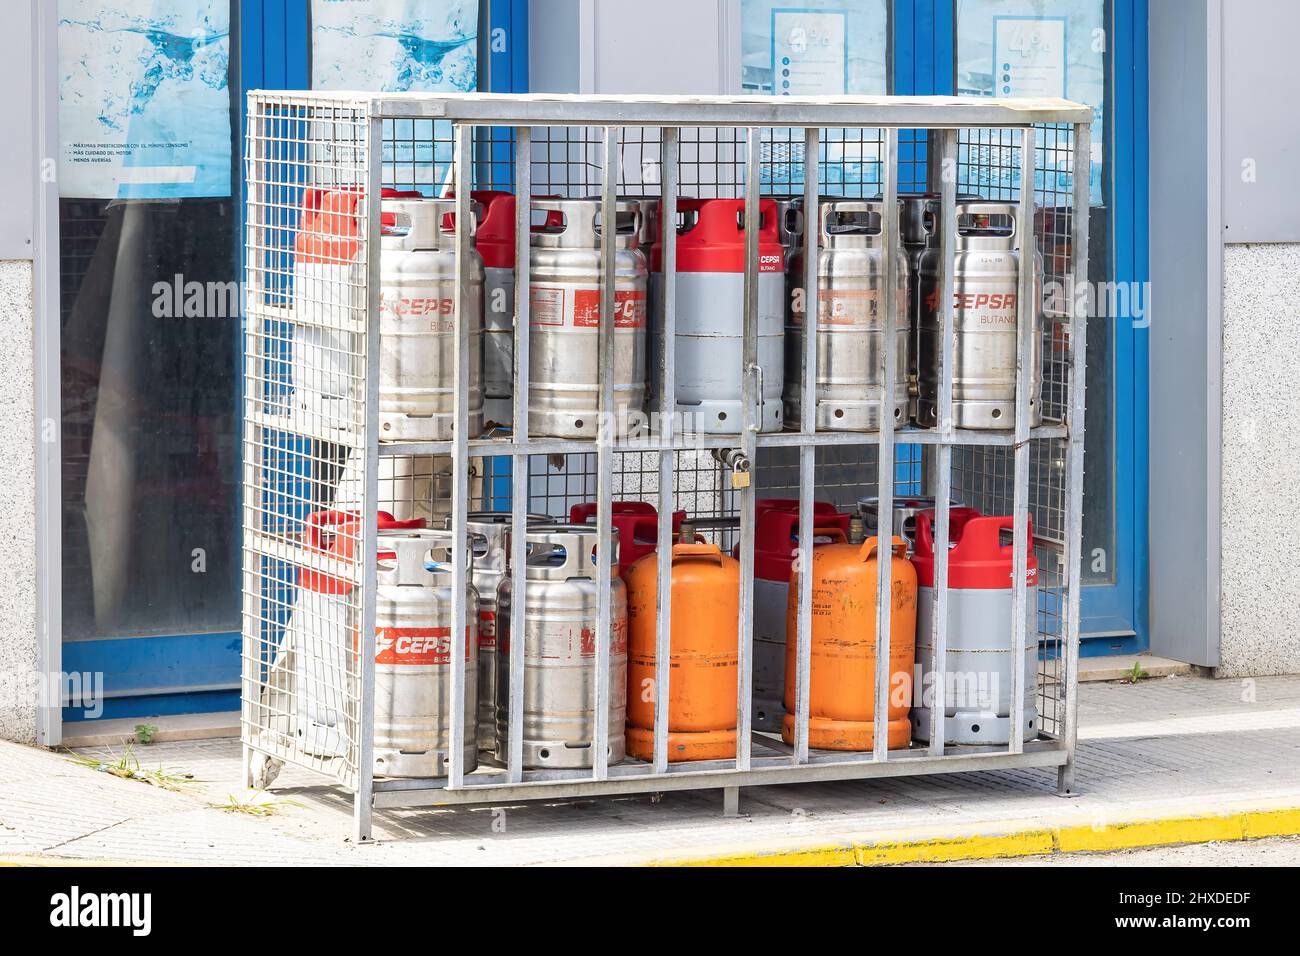 Huelva, Spain - March 10, 2022: Cepsa and Repsol gas cylinders for sale at a Service station Stock Photo